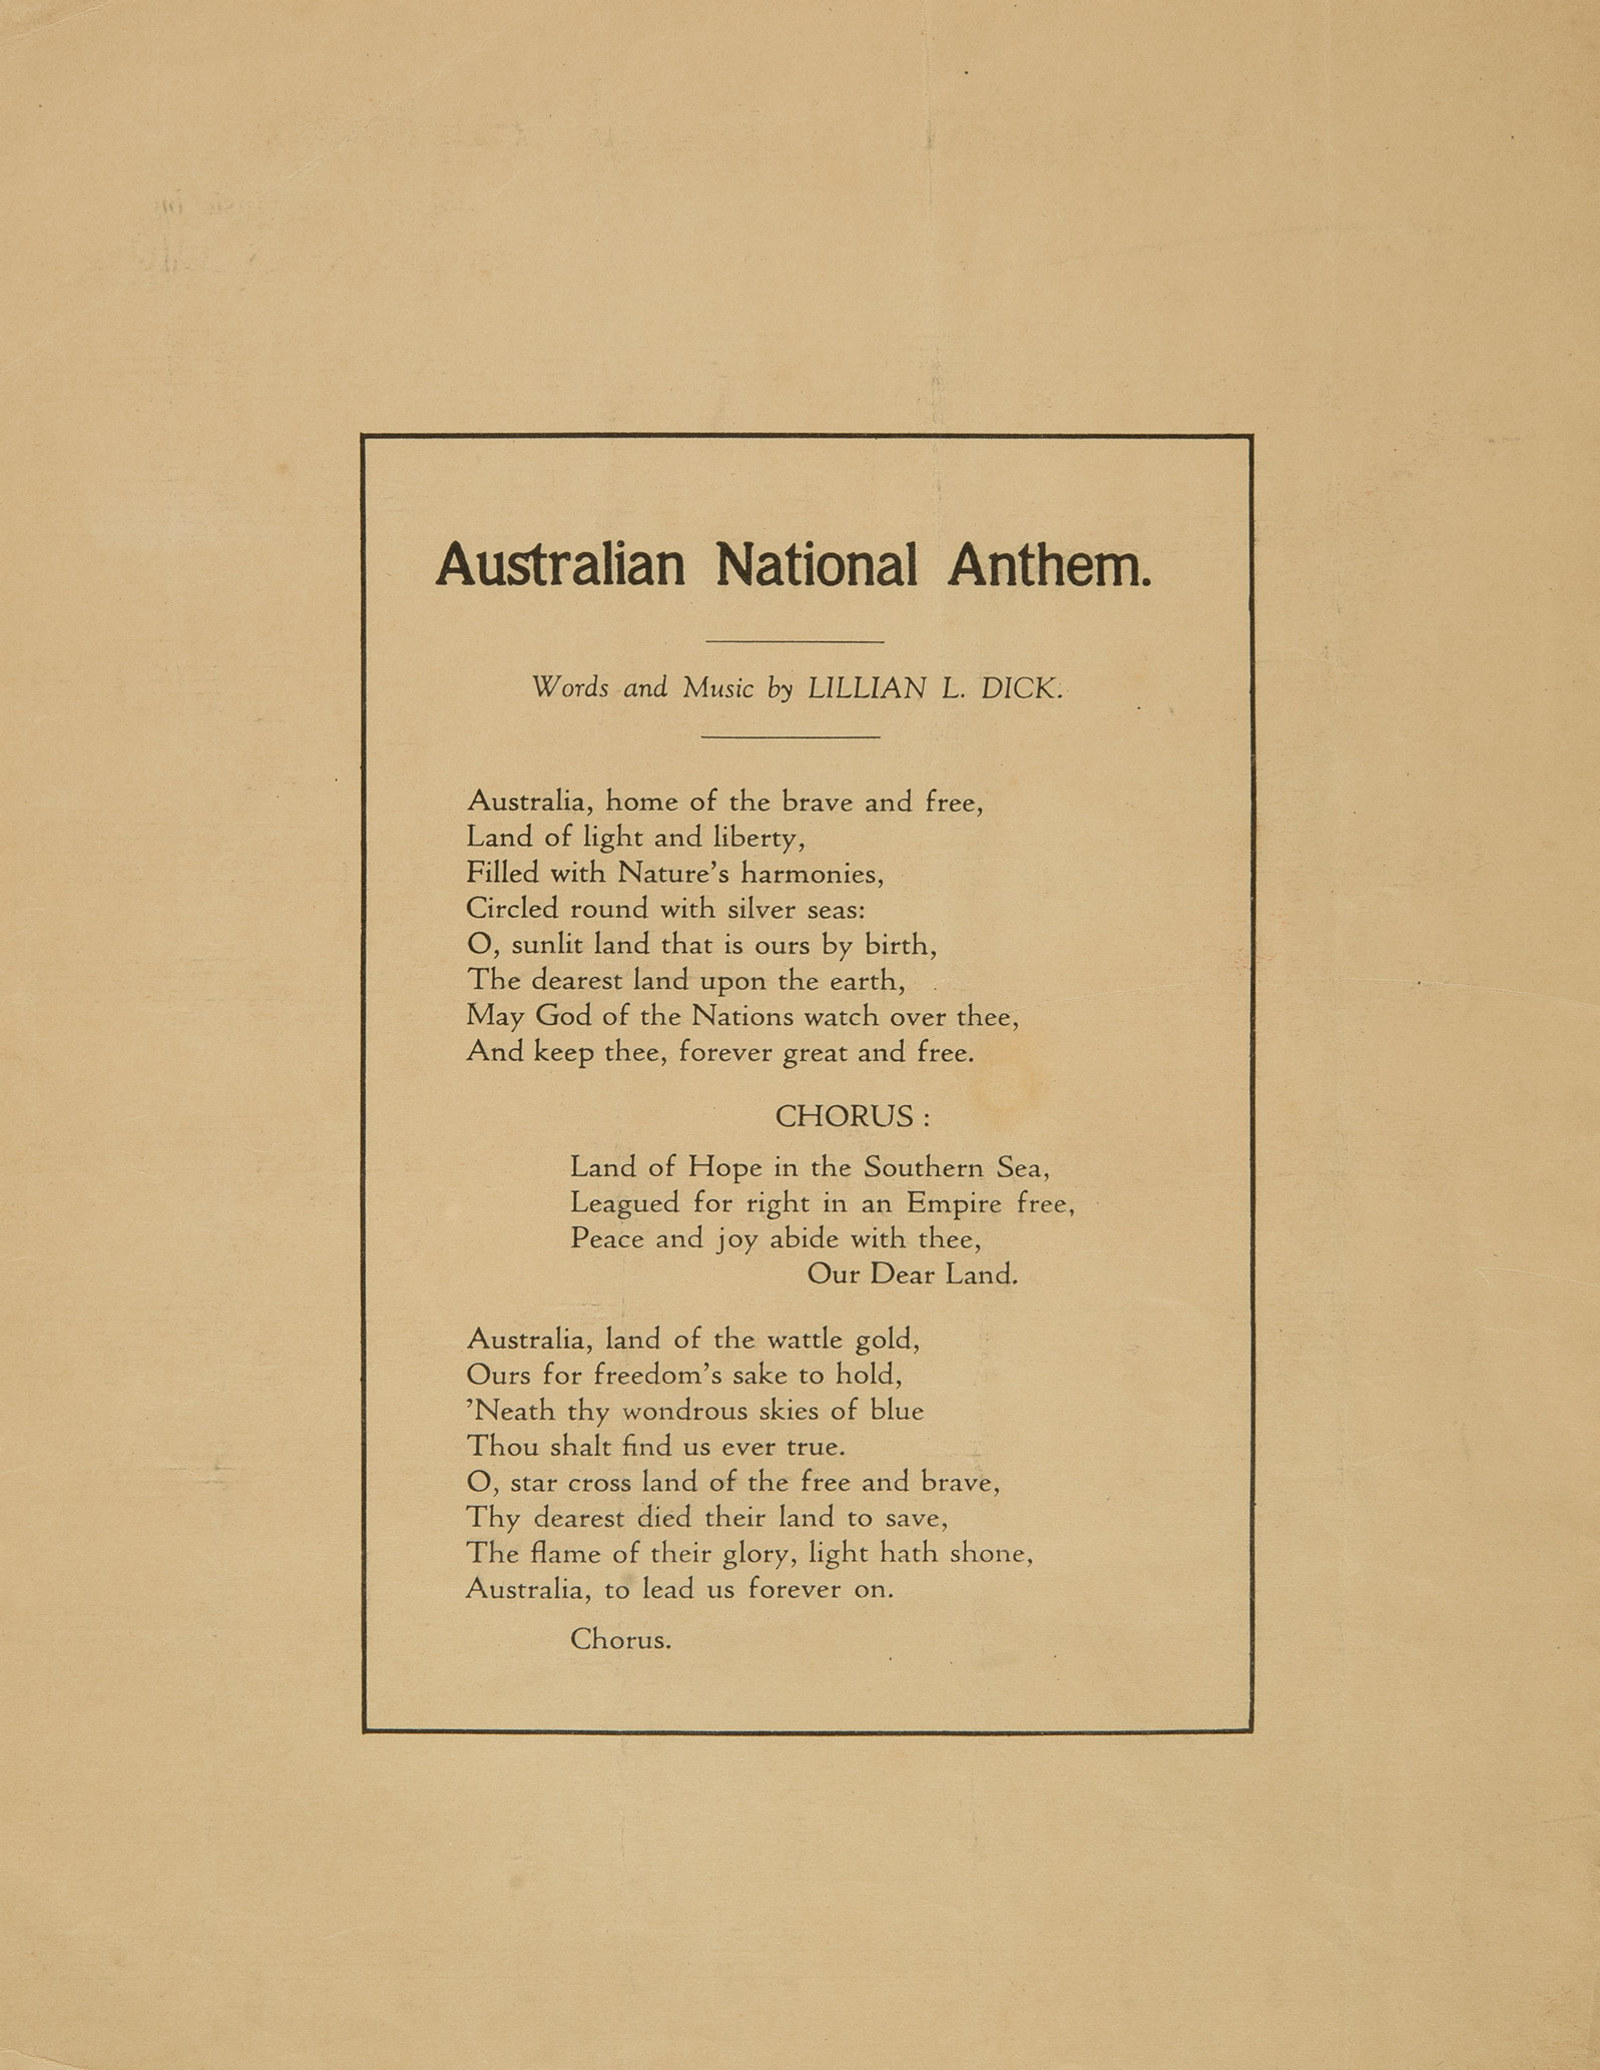 Sheet music lyrics,' Australian National Anthem', words and music by Lillian L. Dick, published 1934